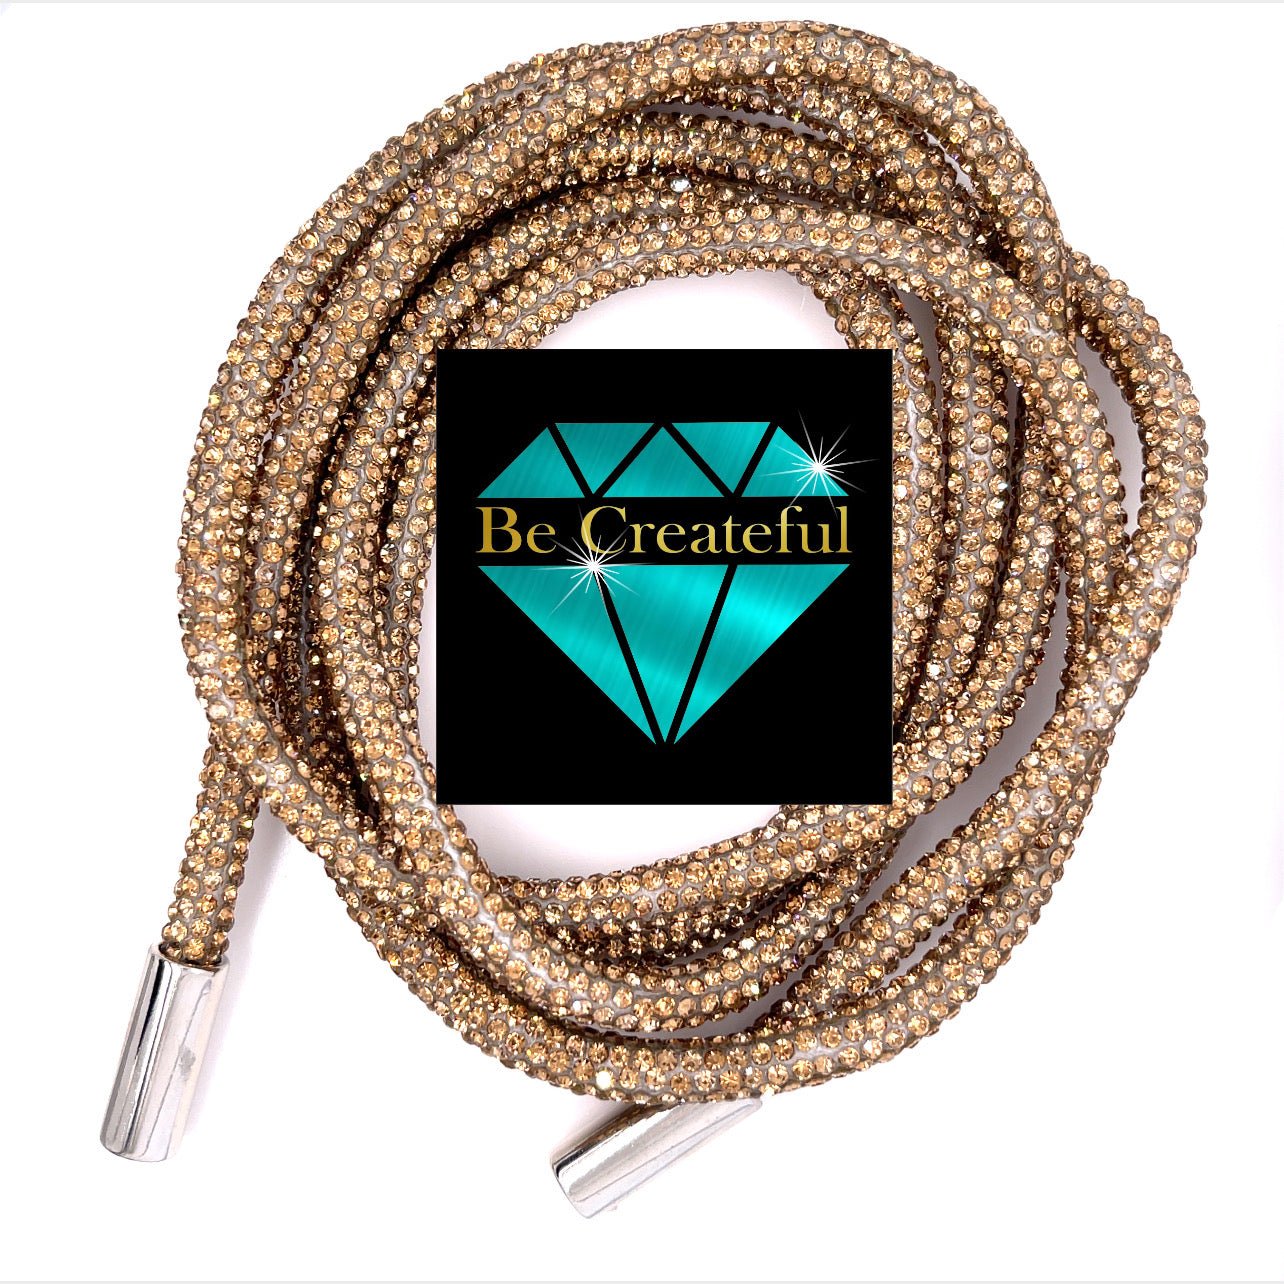 Light Topaz Rhinestone Hoodie Strings are the perfect way to glam up your favorite hoodie. Rhinestone String - String Hoodies